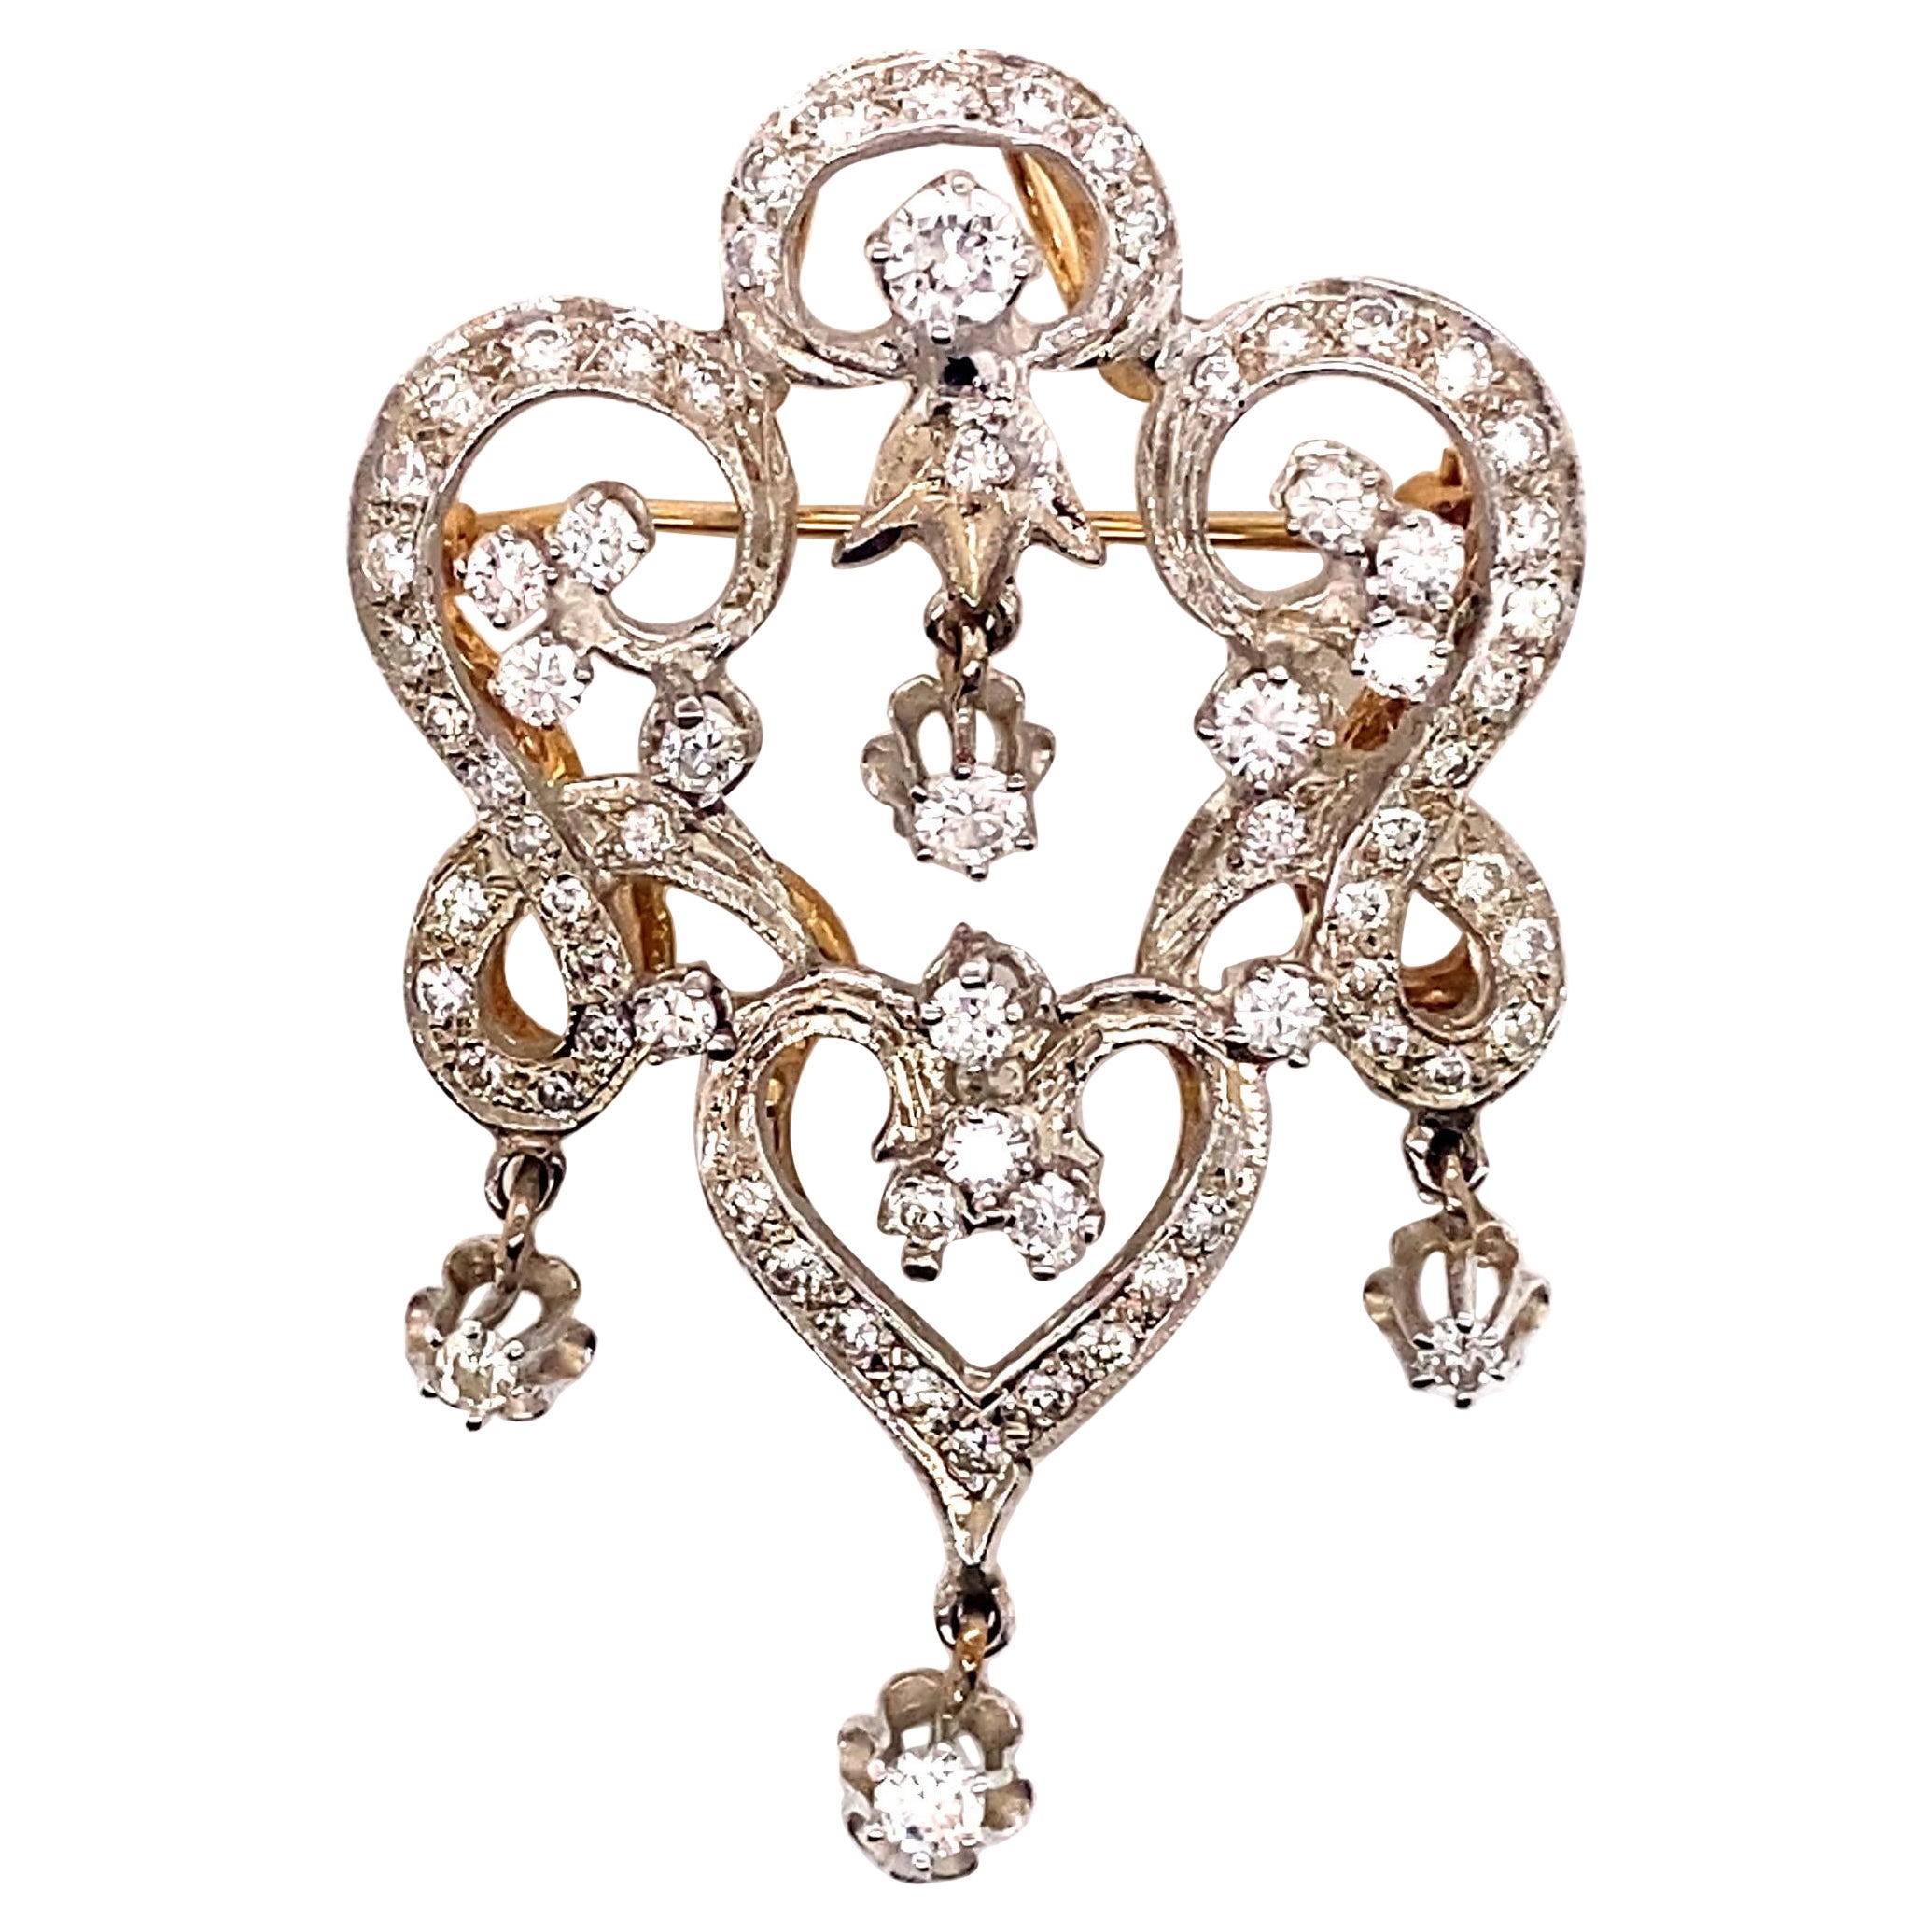 Vintage 1950’s Edwardian Reproduction Diamond Chandelier Brooch and Pendant For Sale